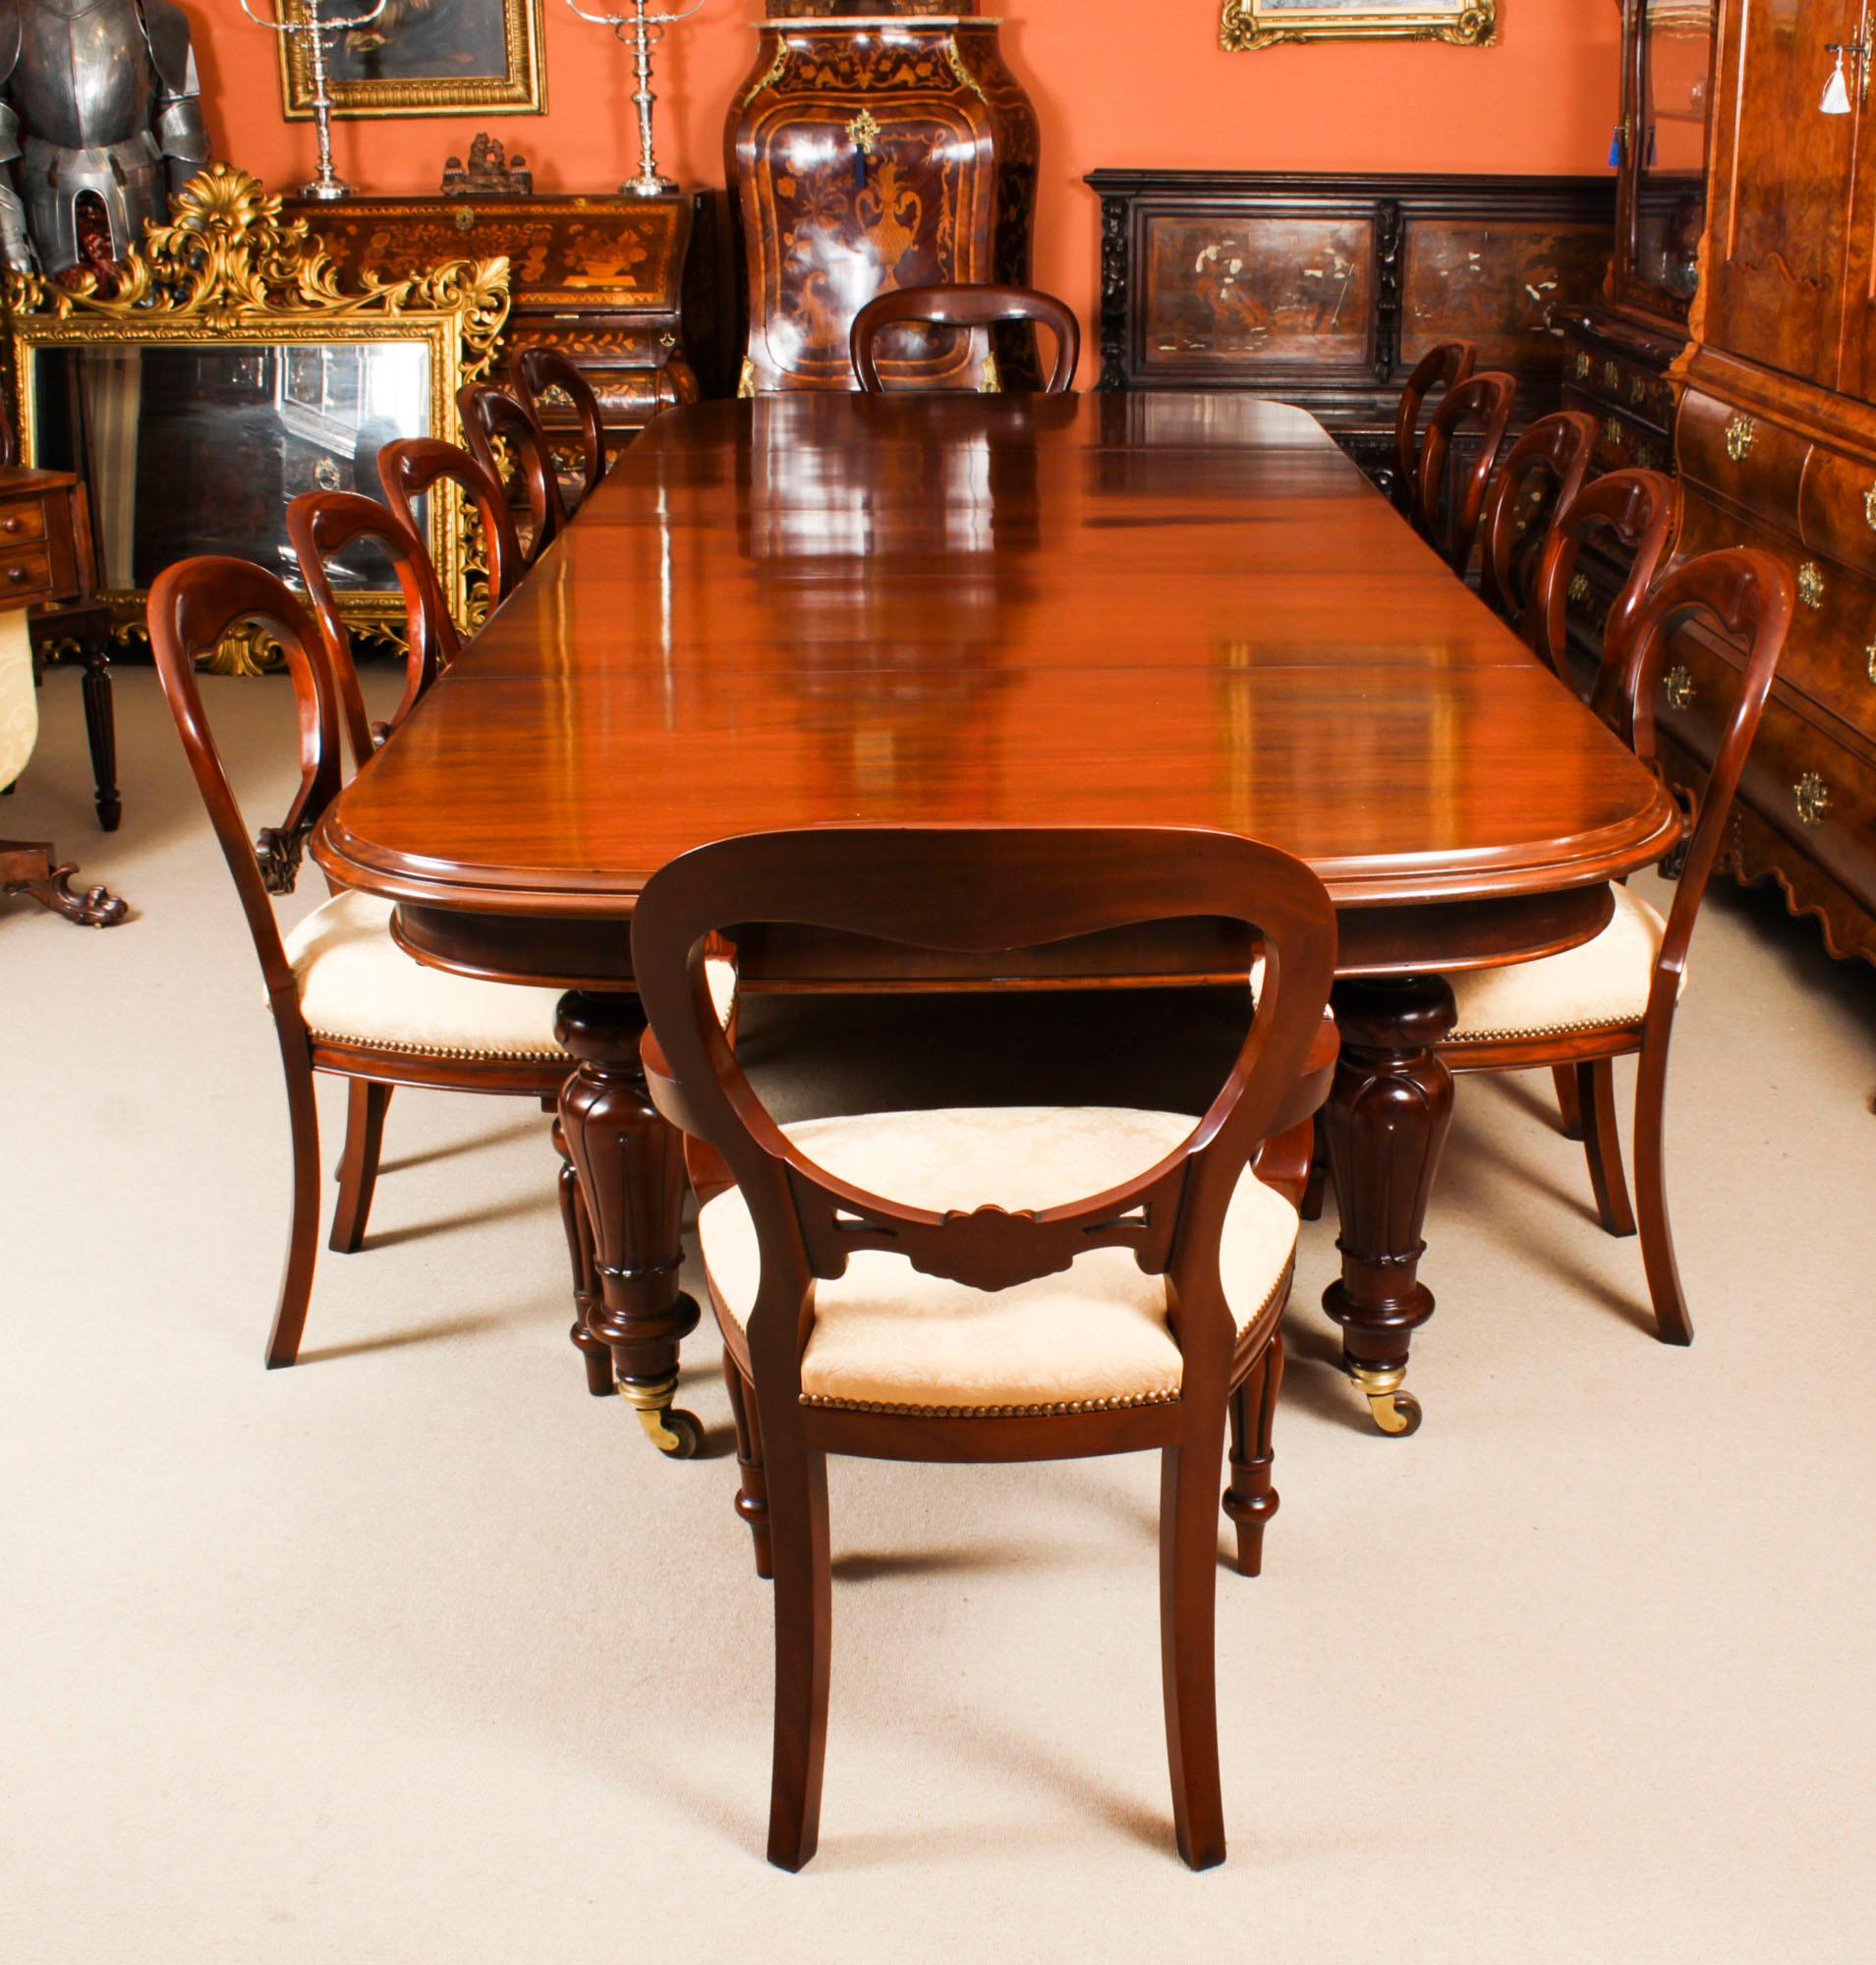 Mid-19th Century Antique Victorian Flame Mahogany D End Extending Dining Table 19th C